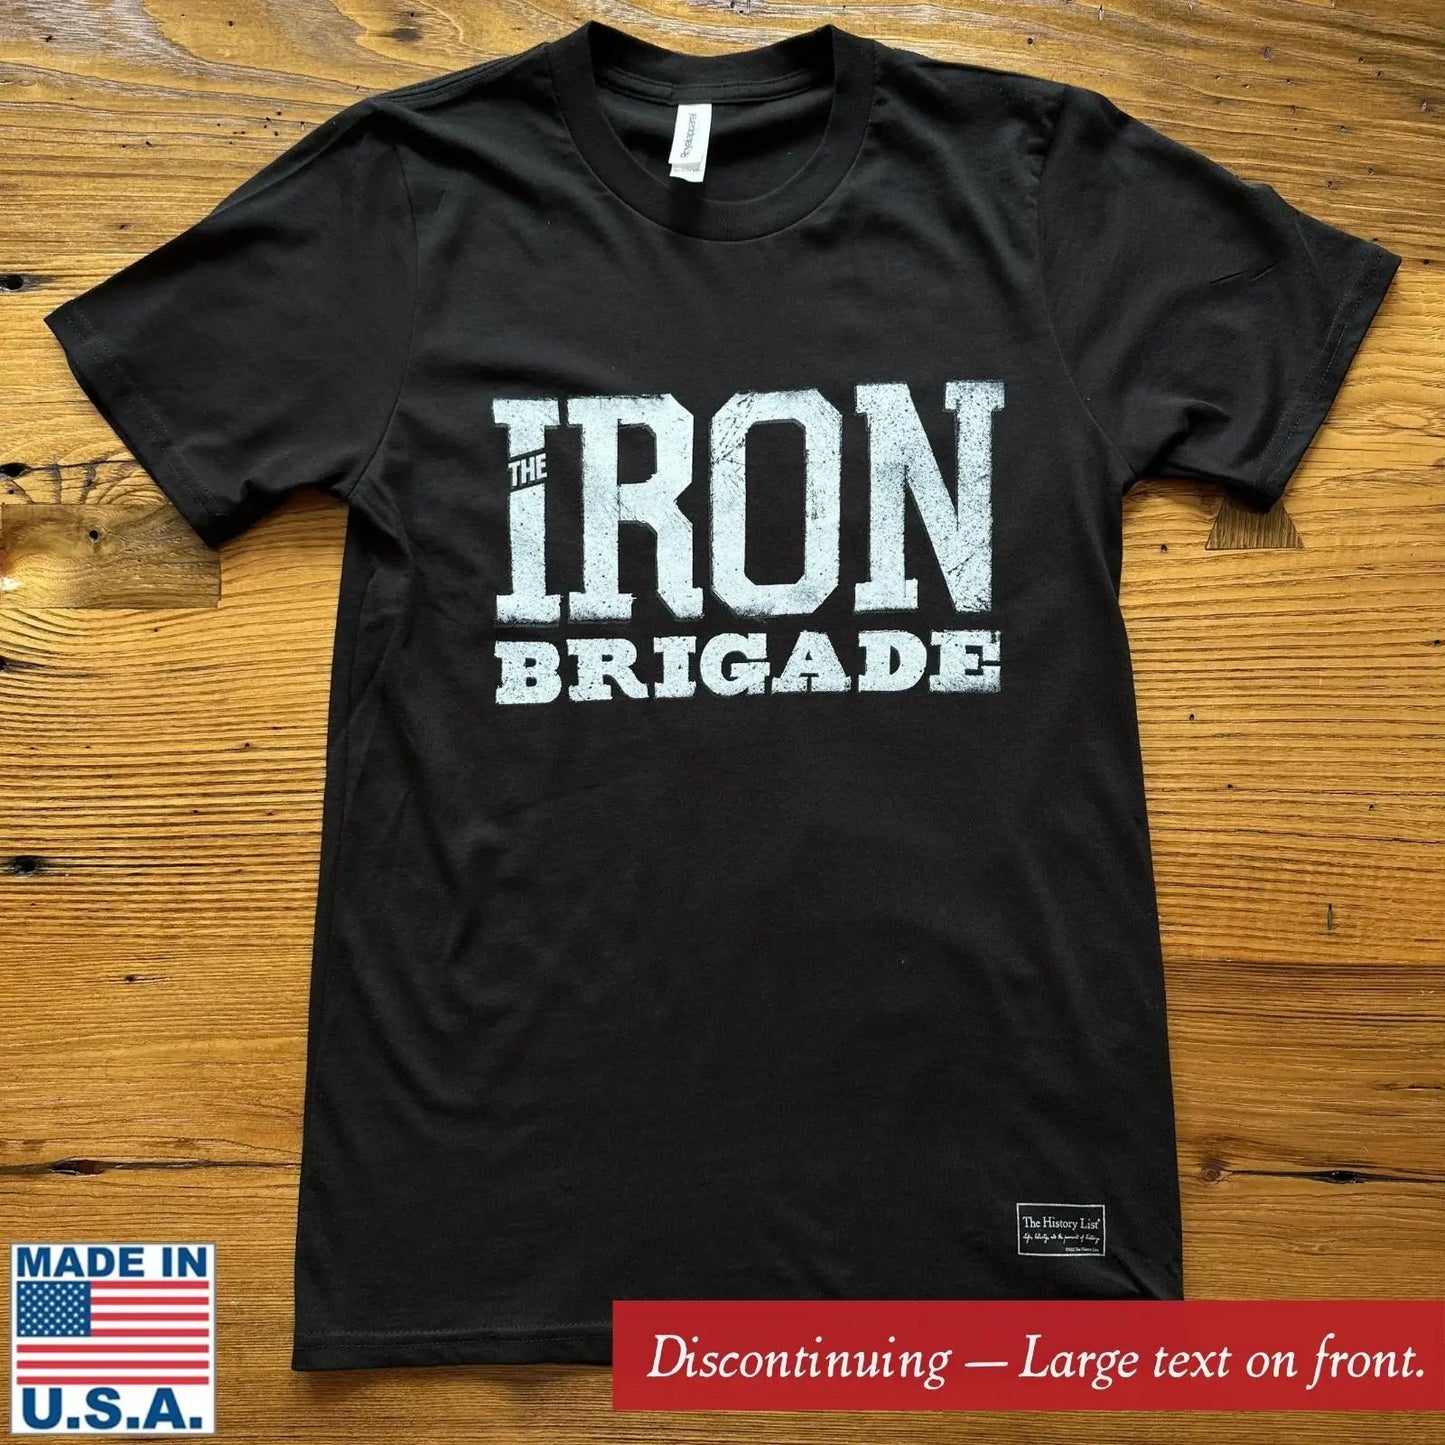 Old front design for The Civil War "Iron Brigade" Shirt Made in America from The History List store